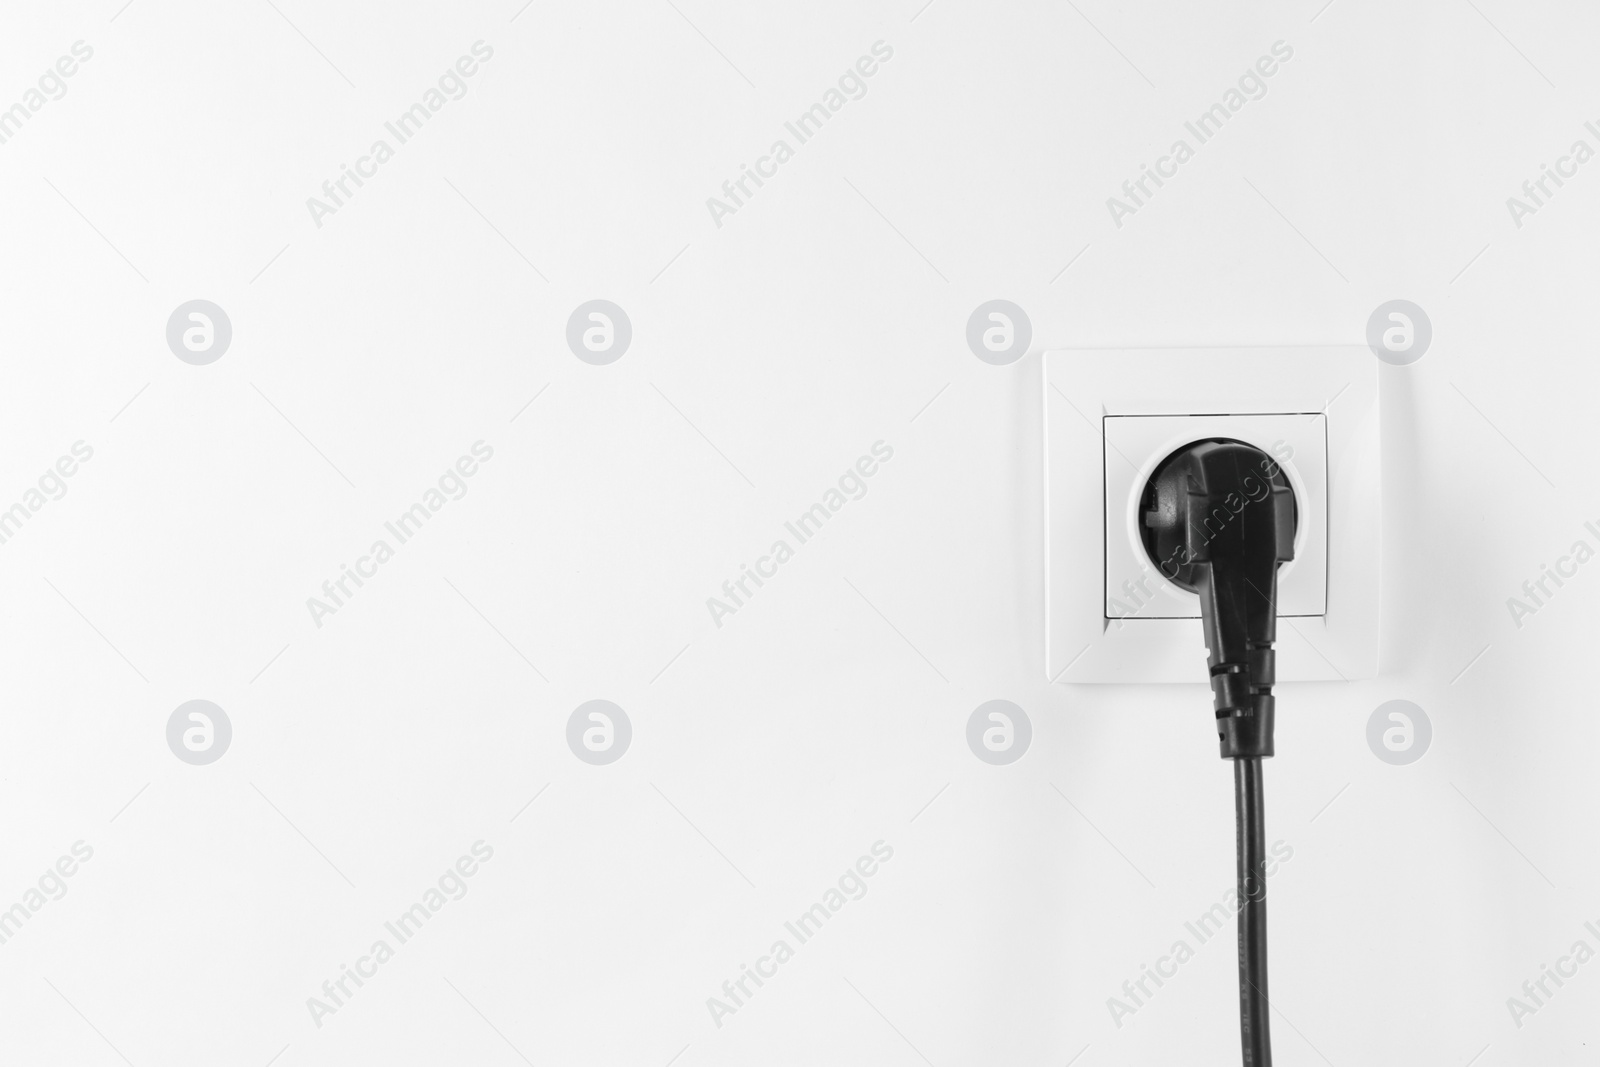 Photo of Power socket and plug on white background. Electrician's equipment